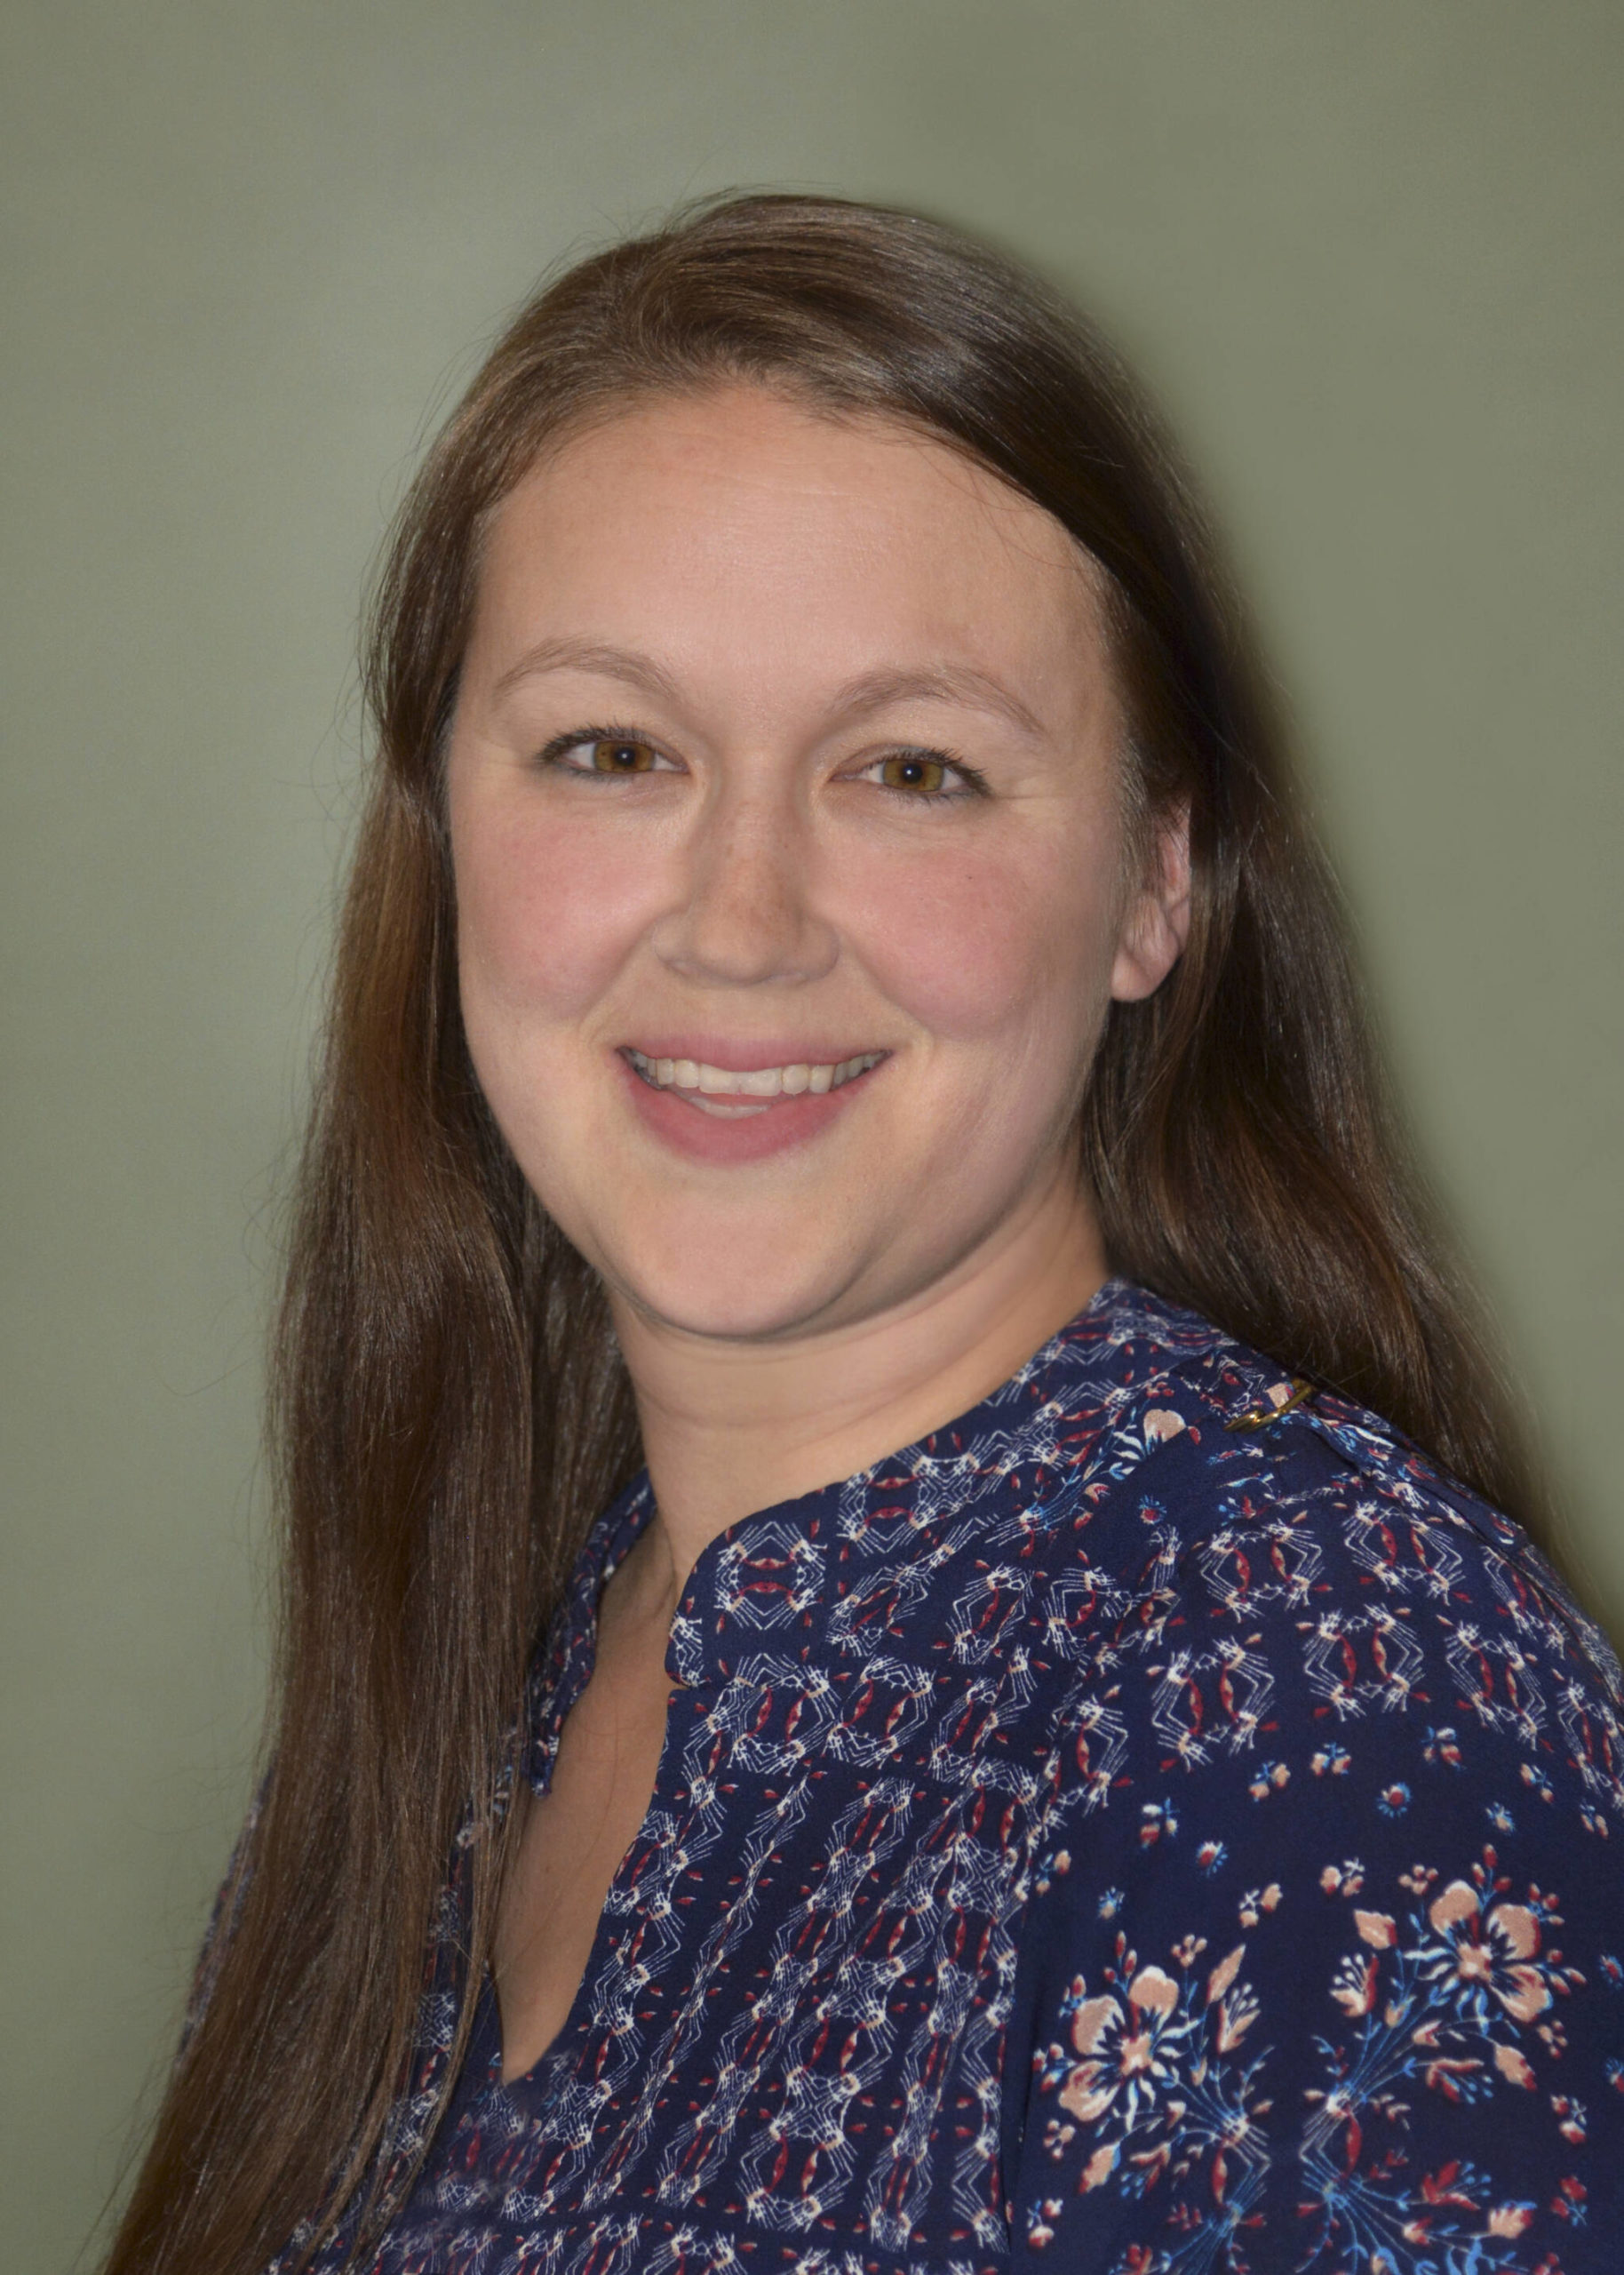 Dr. Christy Martinez has been named a full-time hospitalist at South Peninsula Hospital in Homer, Alaska. Currently a family medicine physician at Homer Medical Clinic, Dr. Martinez moves full time to the hospital on Oct. 1. (Photo provided/South Peninsula Hospital)